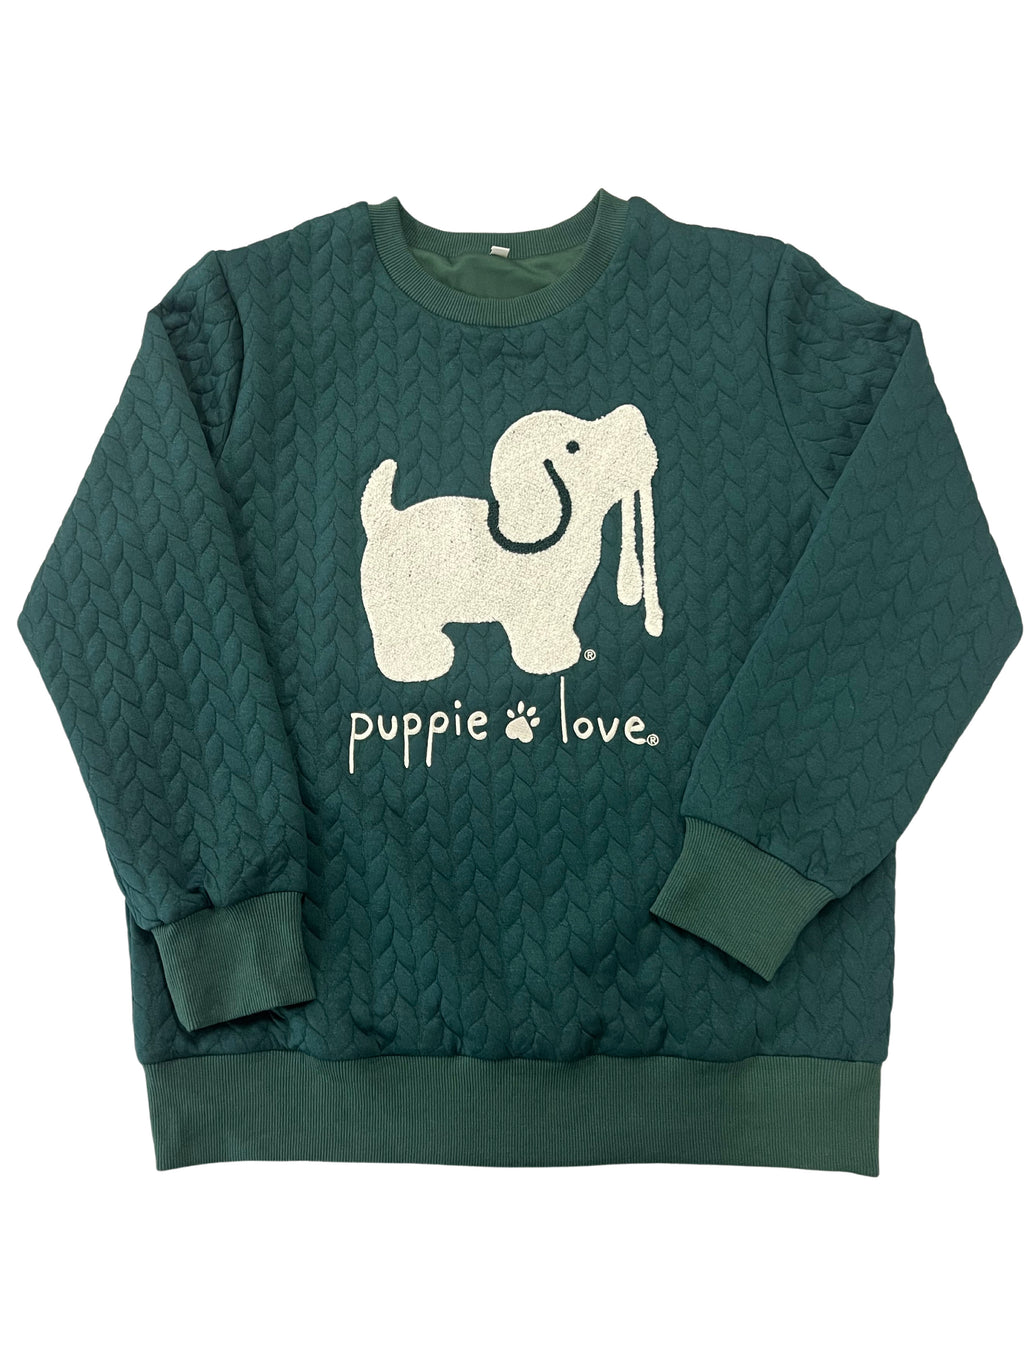 CHENILLE EMBROIDERED SWEATER, FOREST - Puppie Love